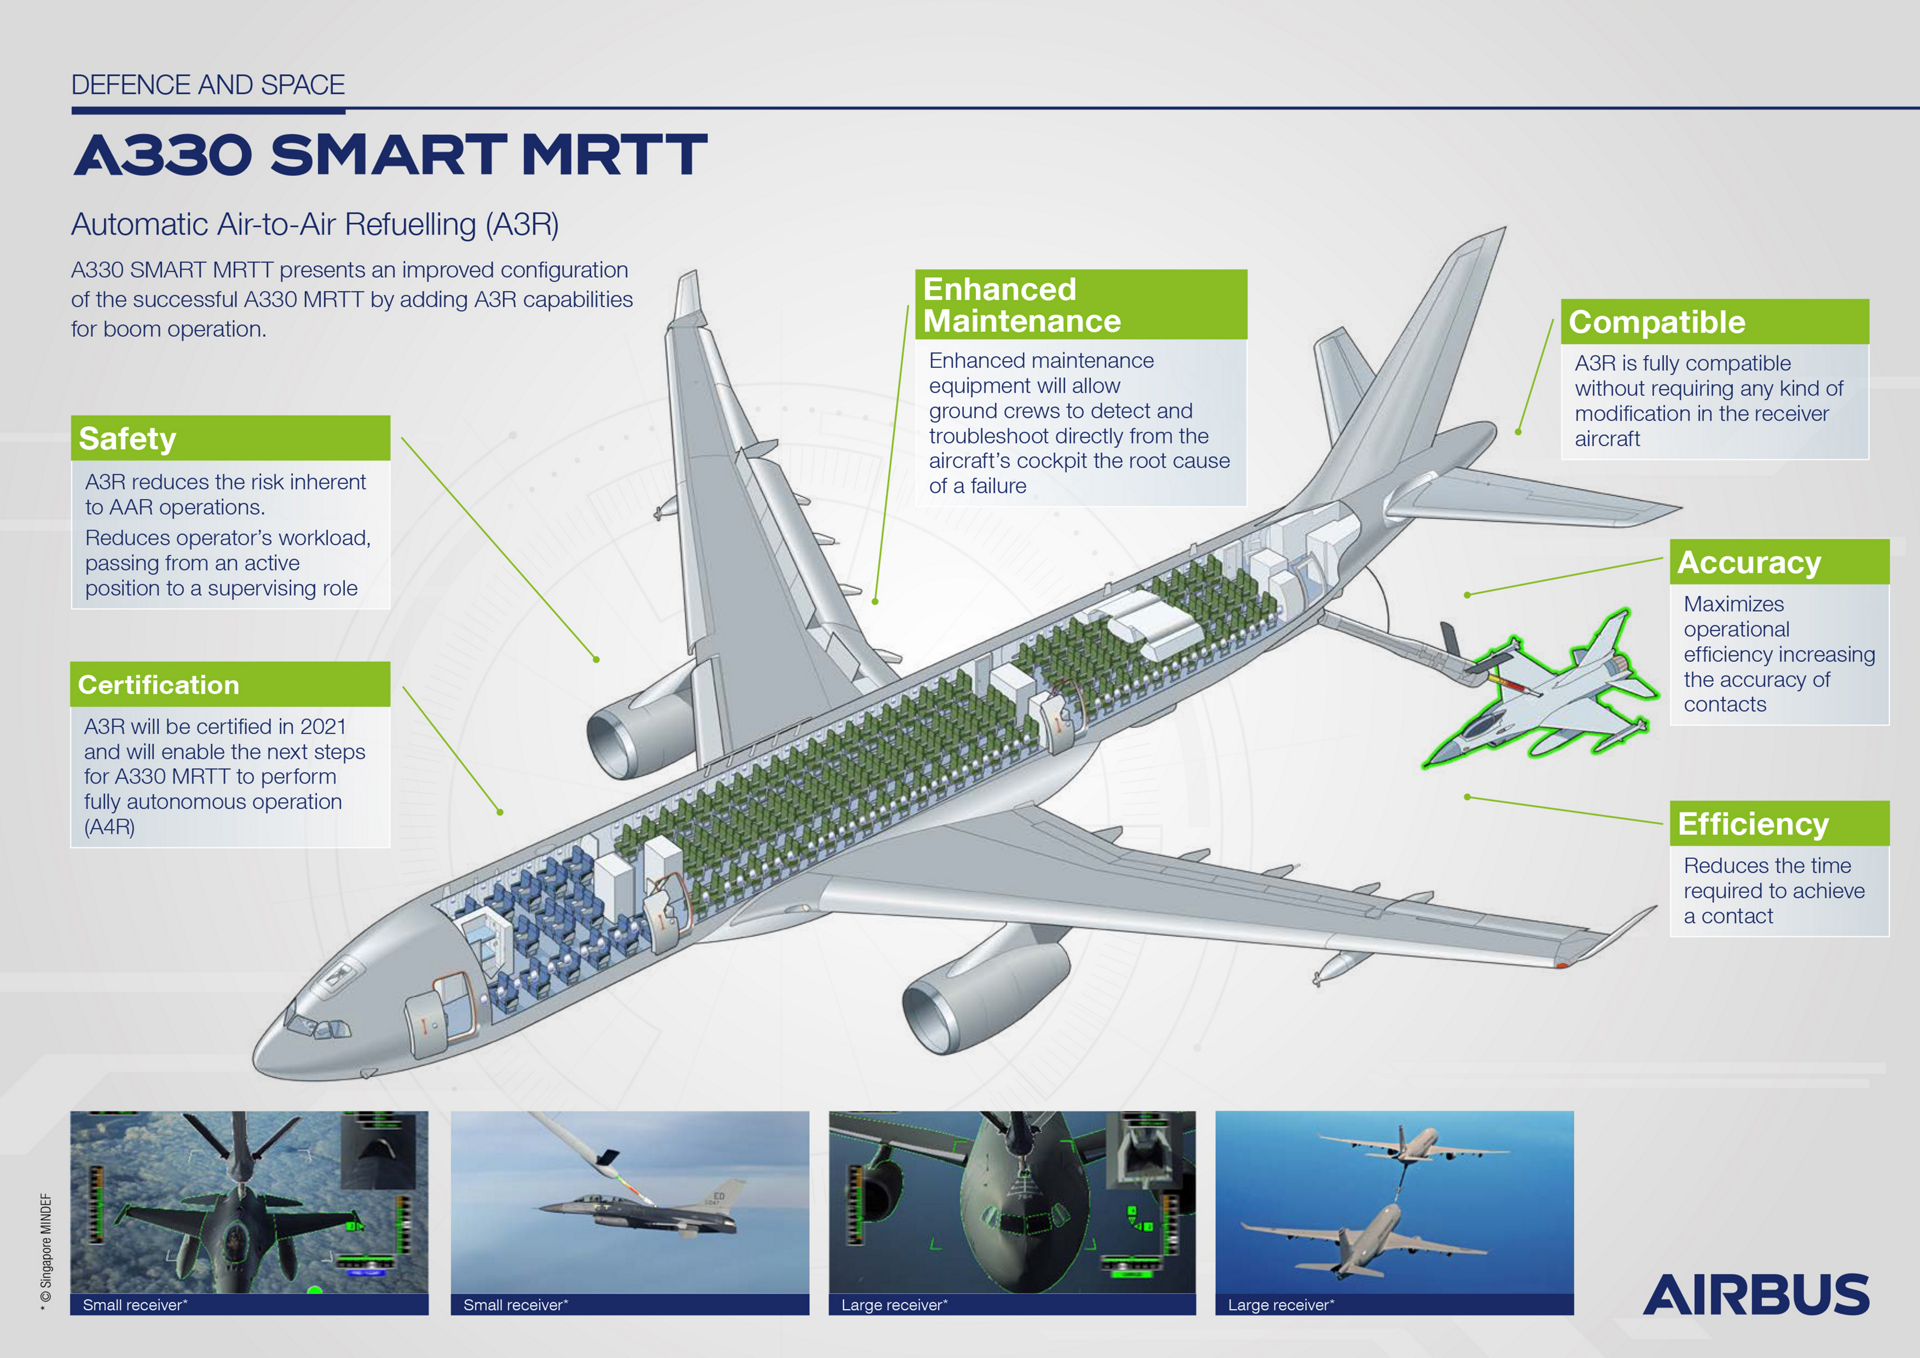 https://airbus-h.assetsadobe2.com/is/image/content/dam/products-and-solutions/military-aircraft/a330-mrtt/automatic-refuelling/A330-MRTT-infographic-Singapore.jpg?wid=1920&fit=fit,1&qlt=85,0&fmt=png-alpha